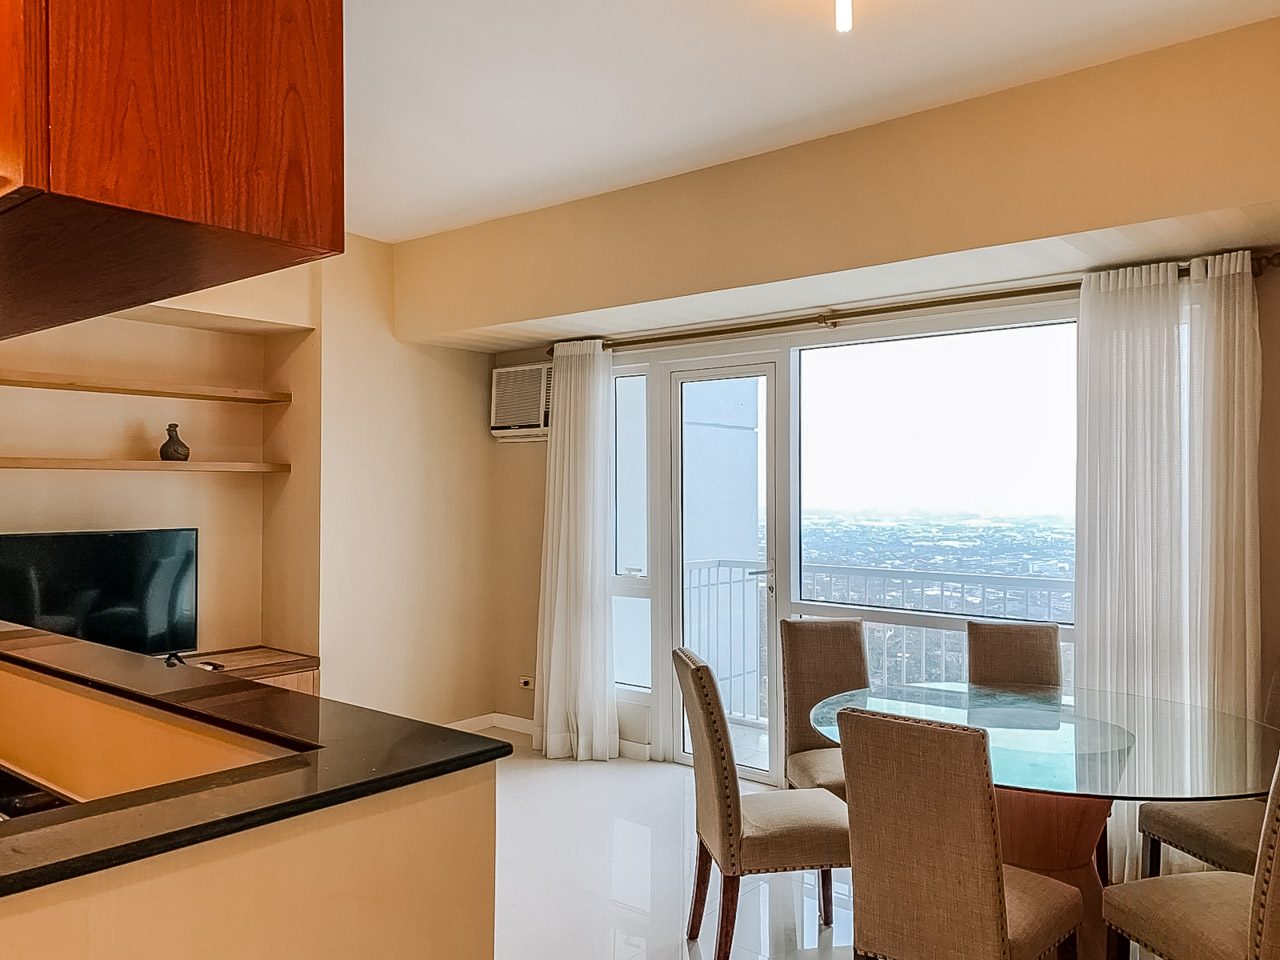 RCMP18 Furnished 2 Bedroom Condo for Rent in Marco Polo Residences - 1